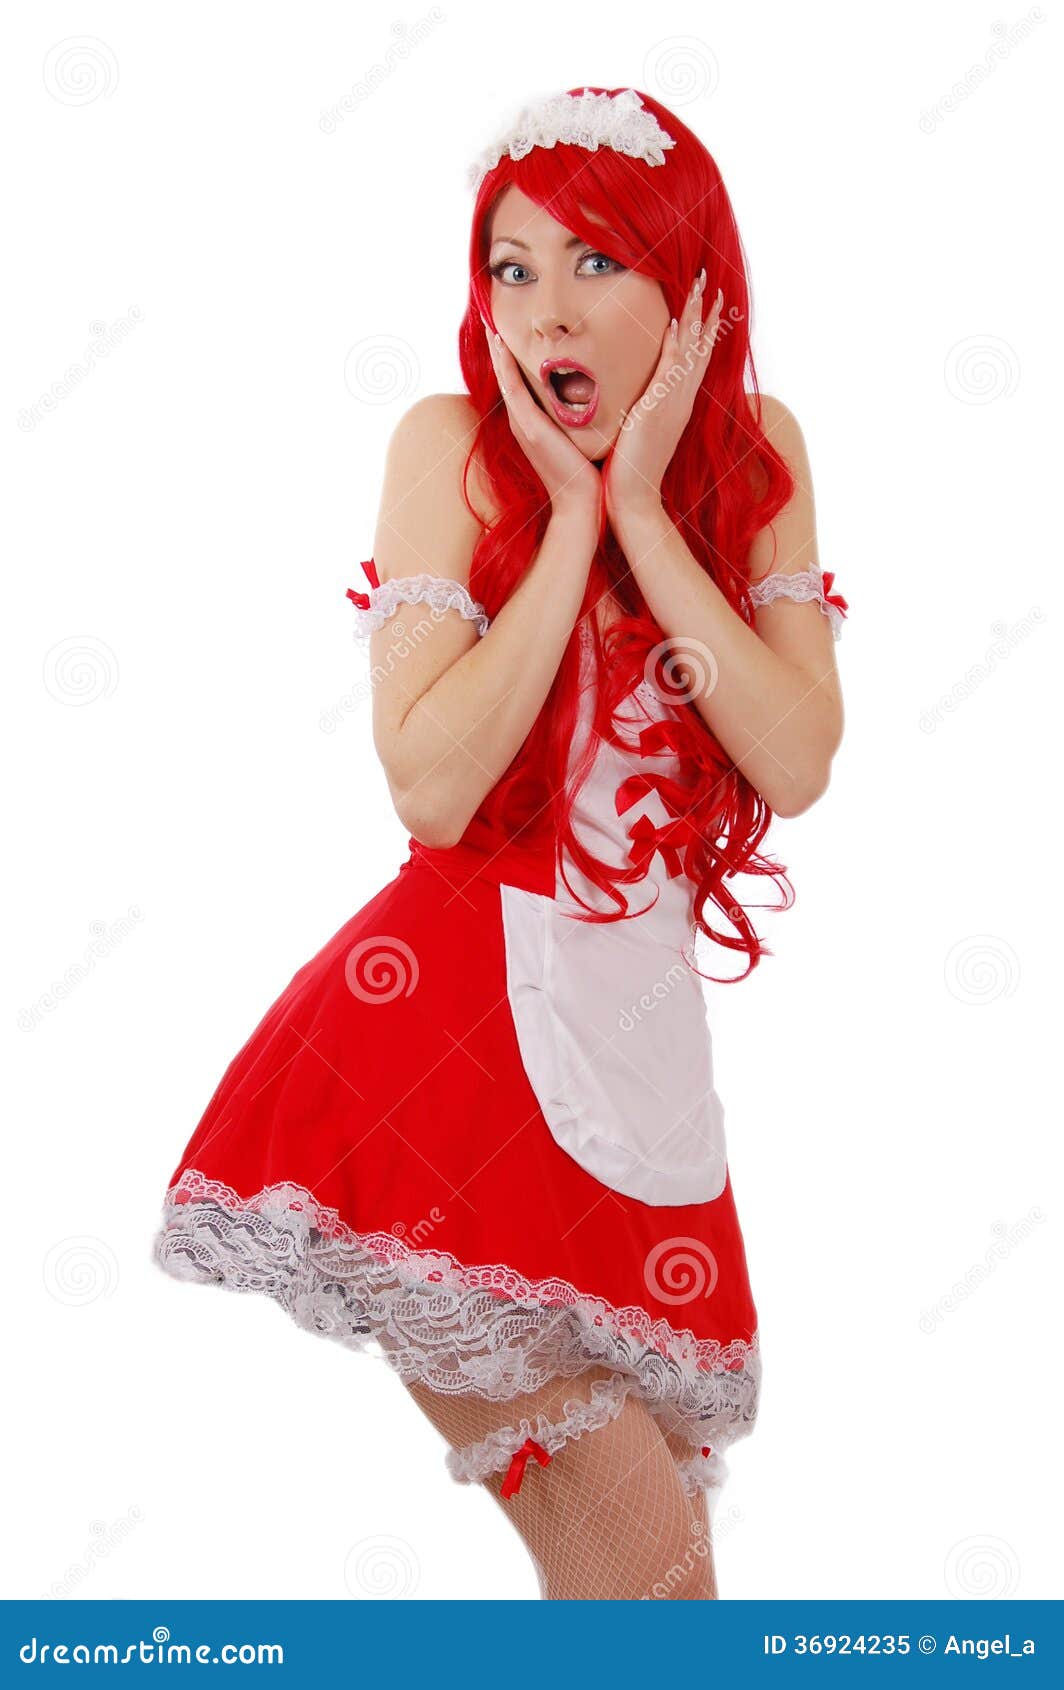 Seductive Red-headed Servant Girl With Shocked Face Stock Image - Image ...